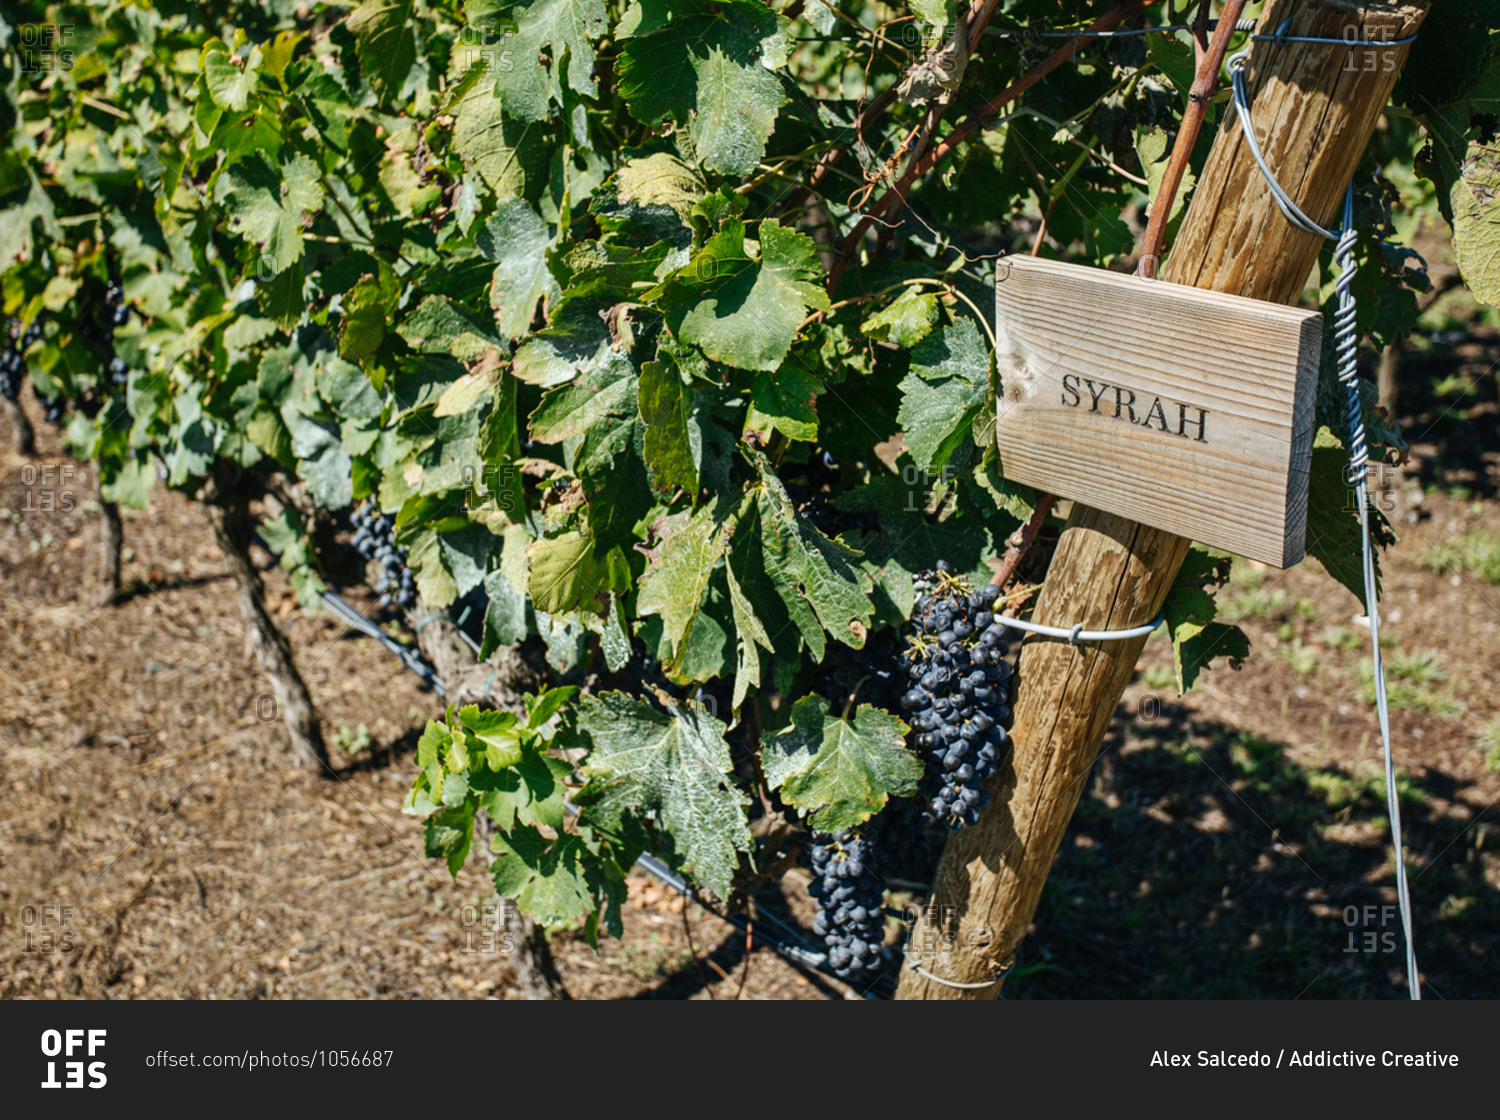 Bright bunches of fresh syrah grapes growing on vine with thin twigs and spiky leaves on vineyard plantation